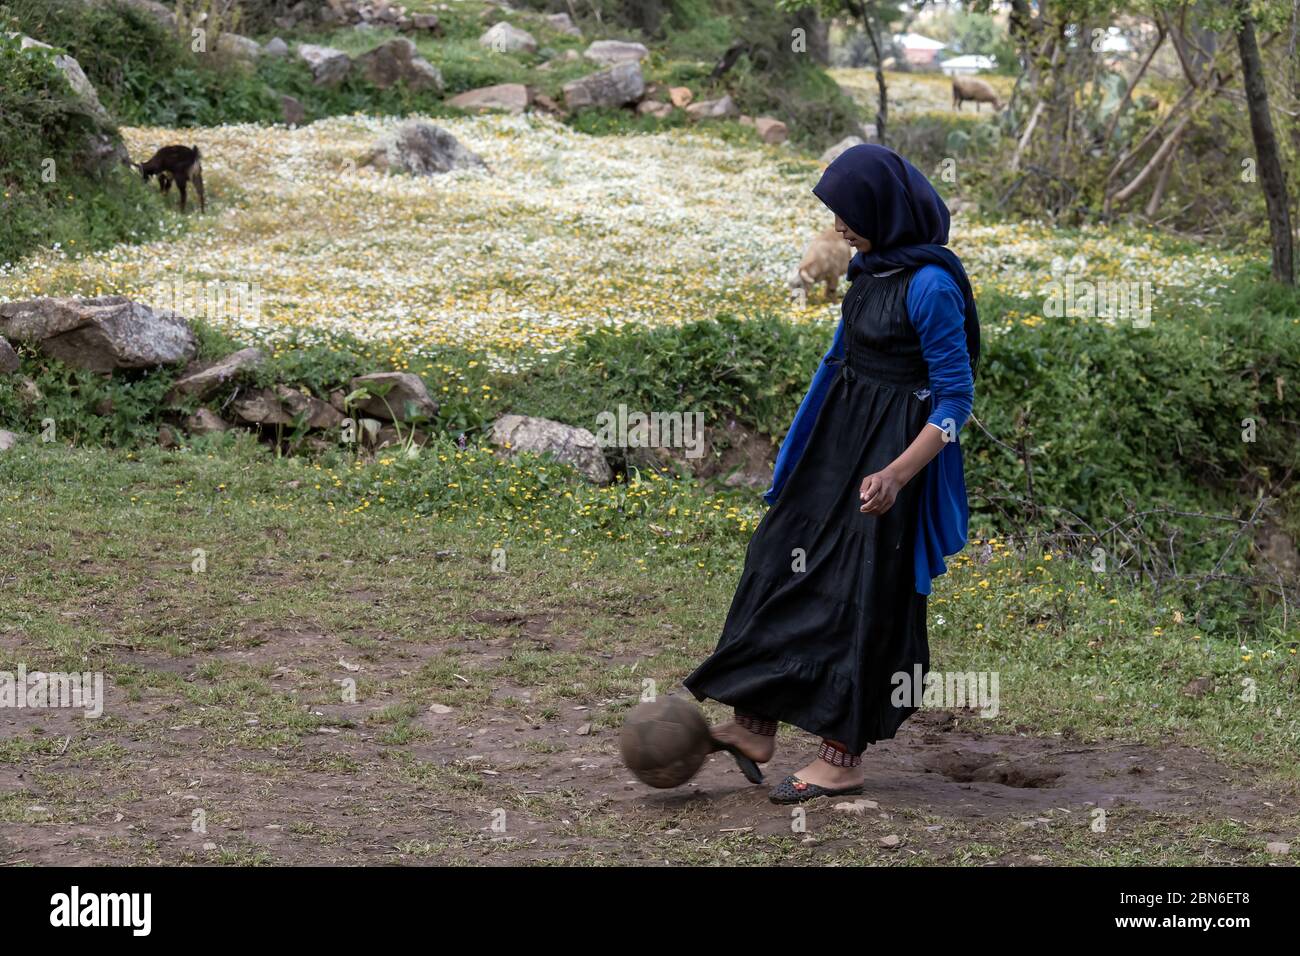 Rural area of Khizana, Chefchaouen, Morocco - April 19, 2018: A Moroccan girl playing football on the field Stock Photo